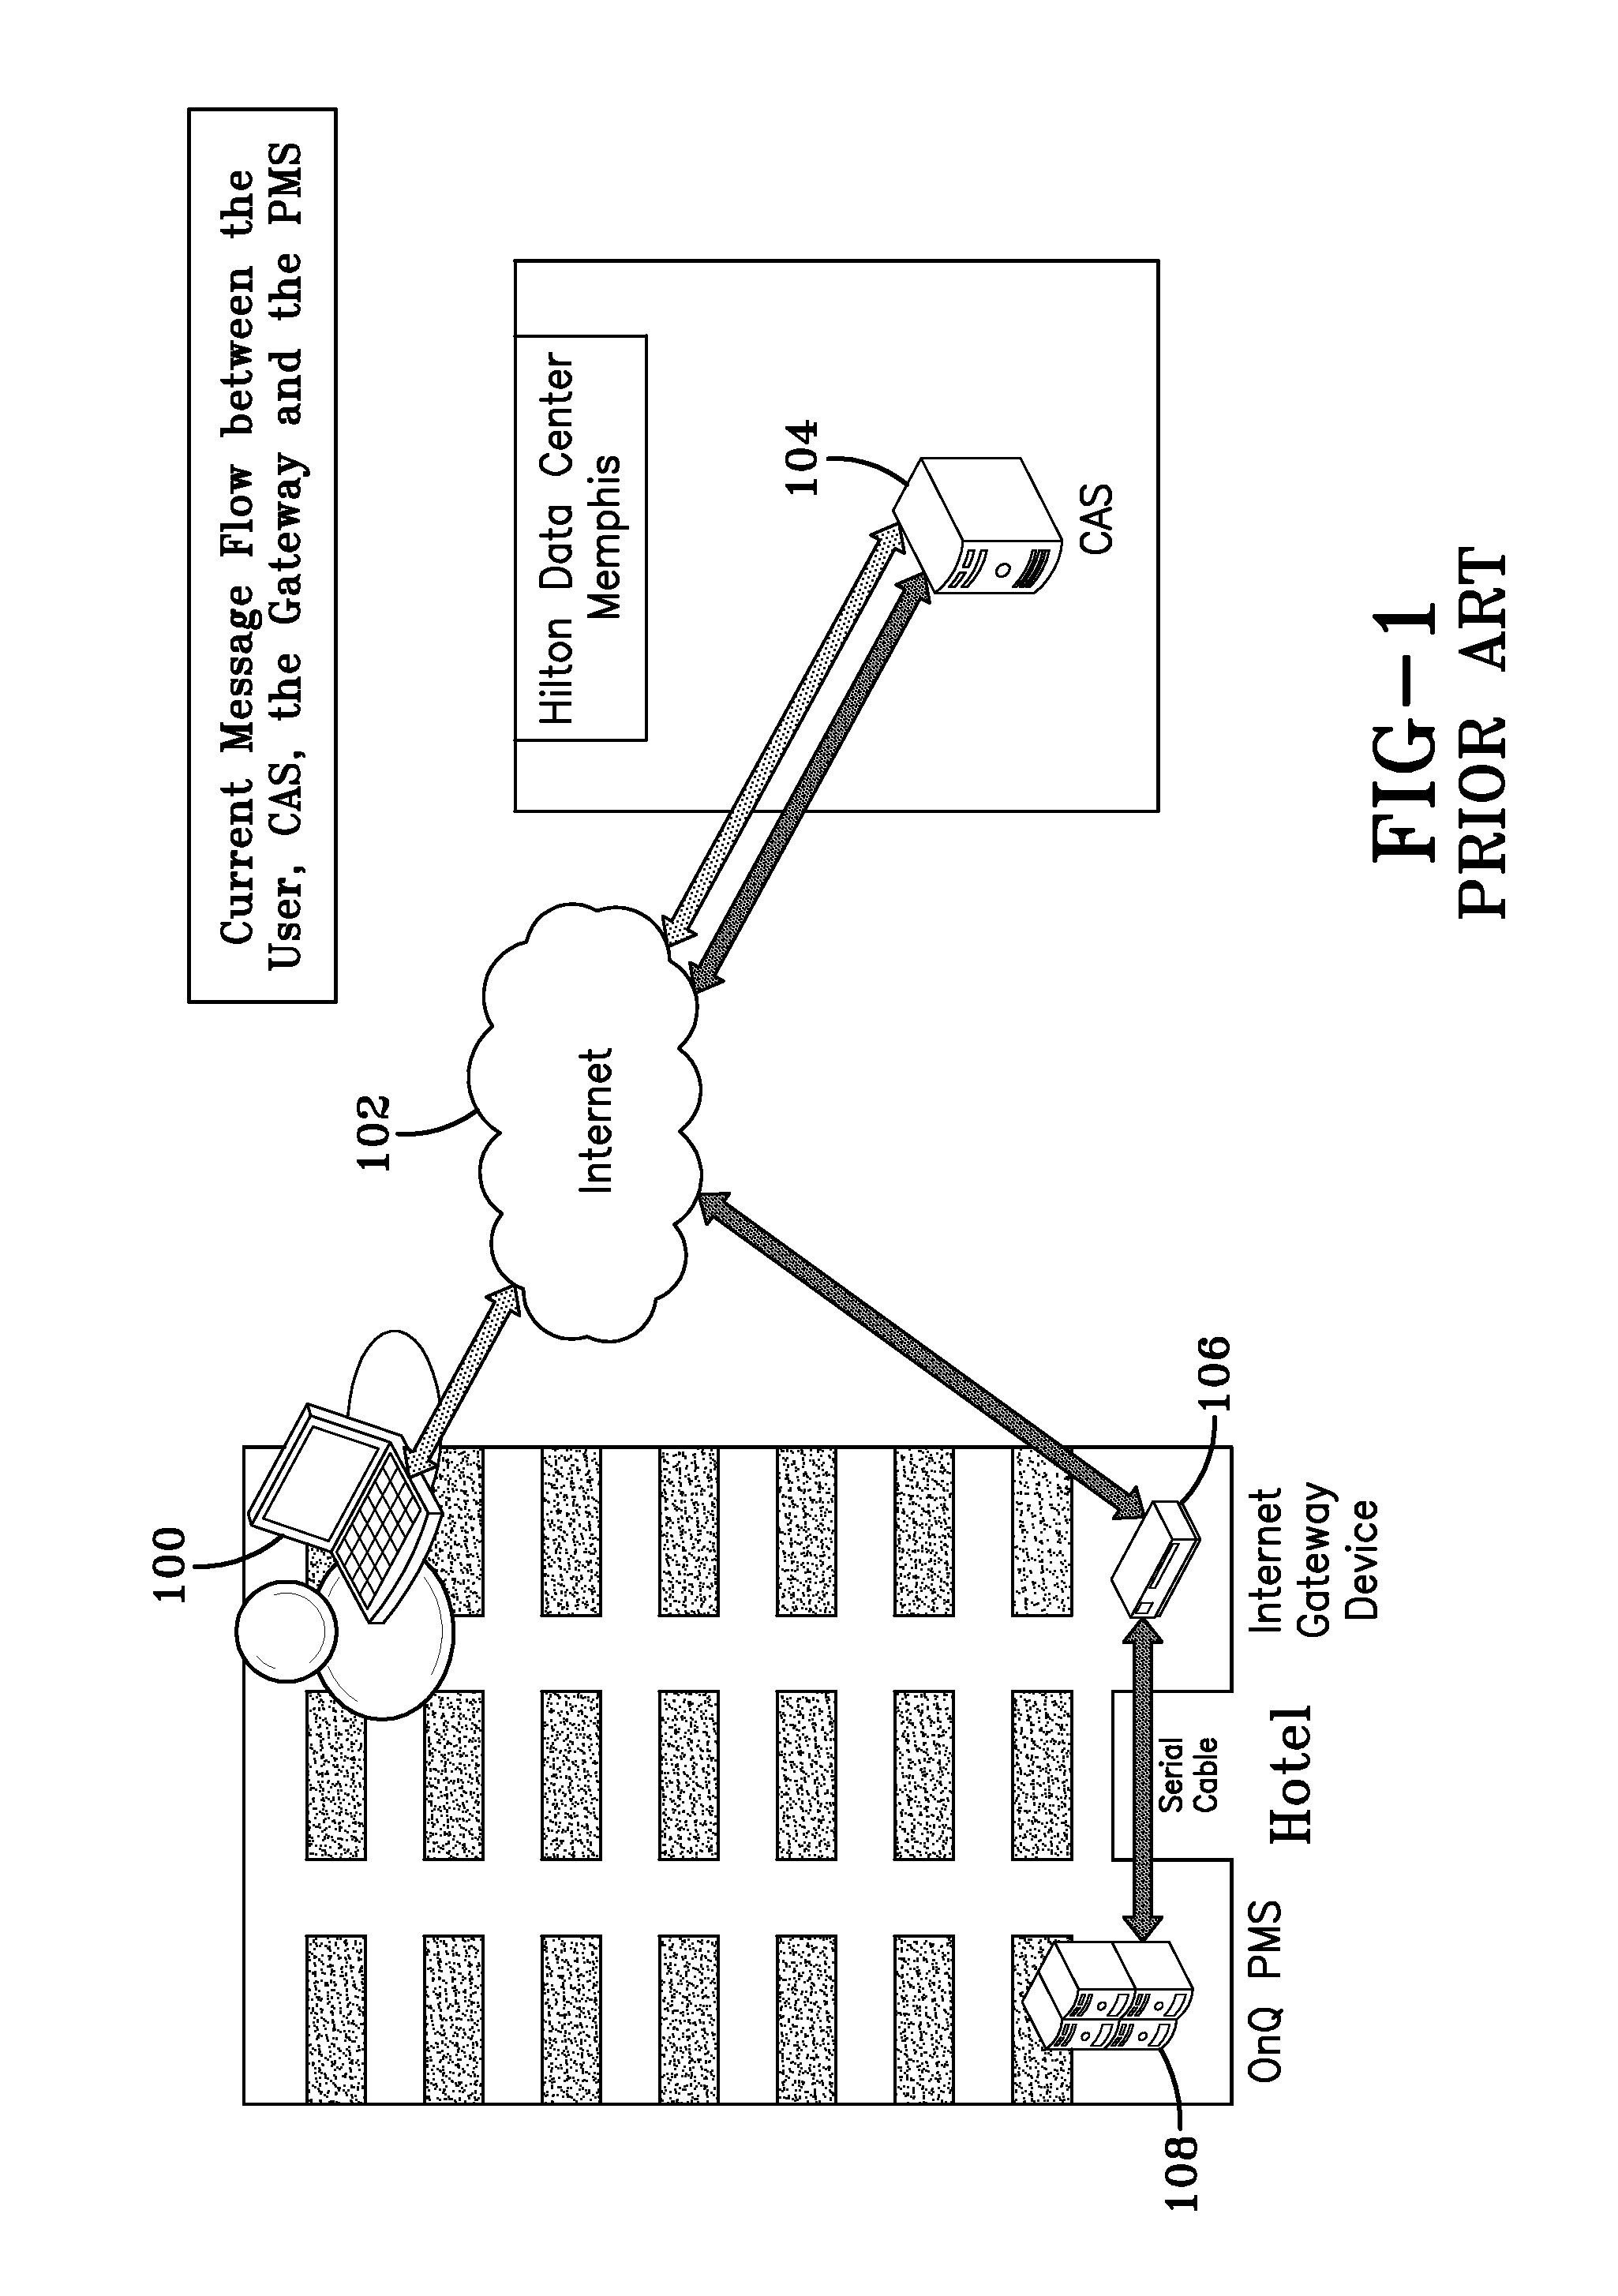 System and method for providing internet access services at hotels within a hotel chain